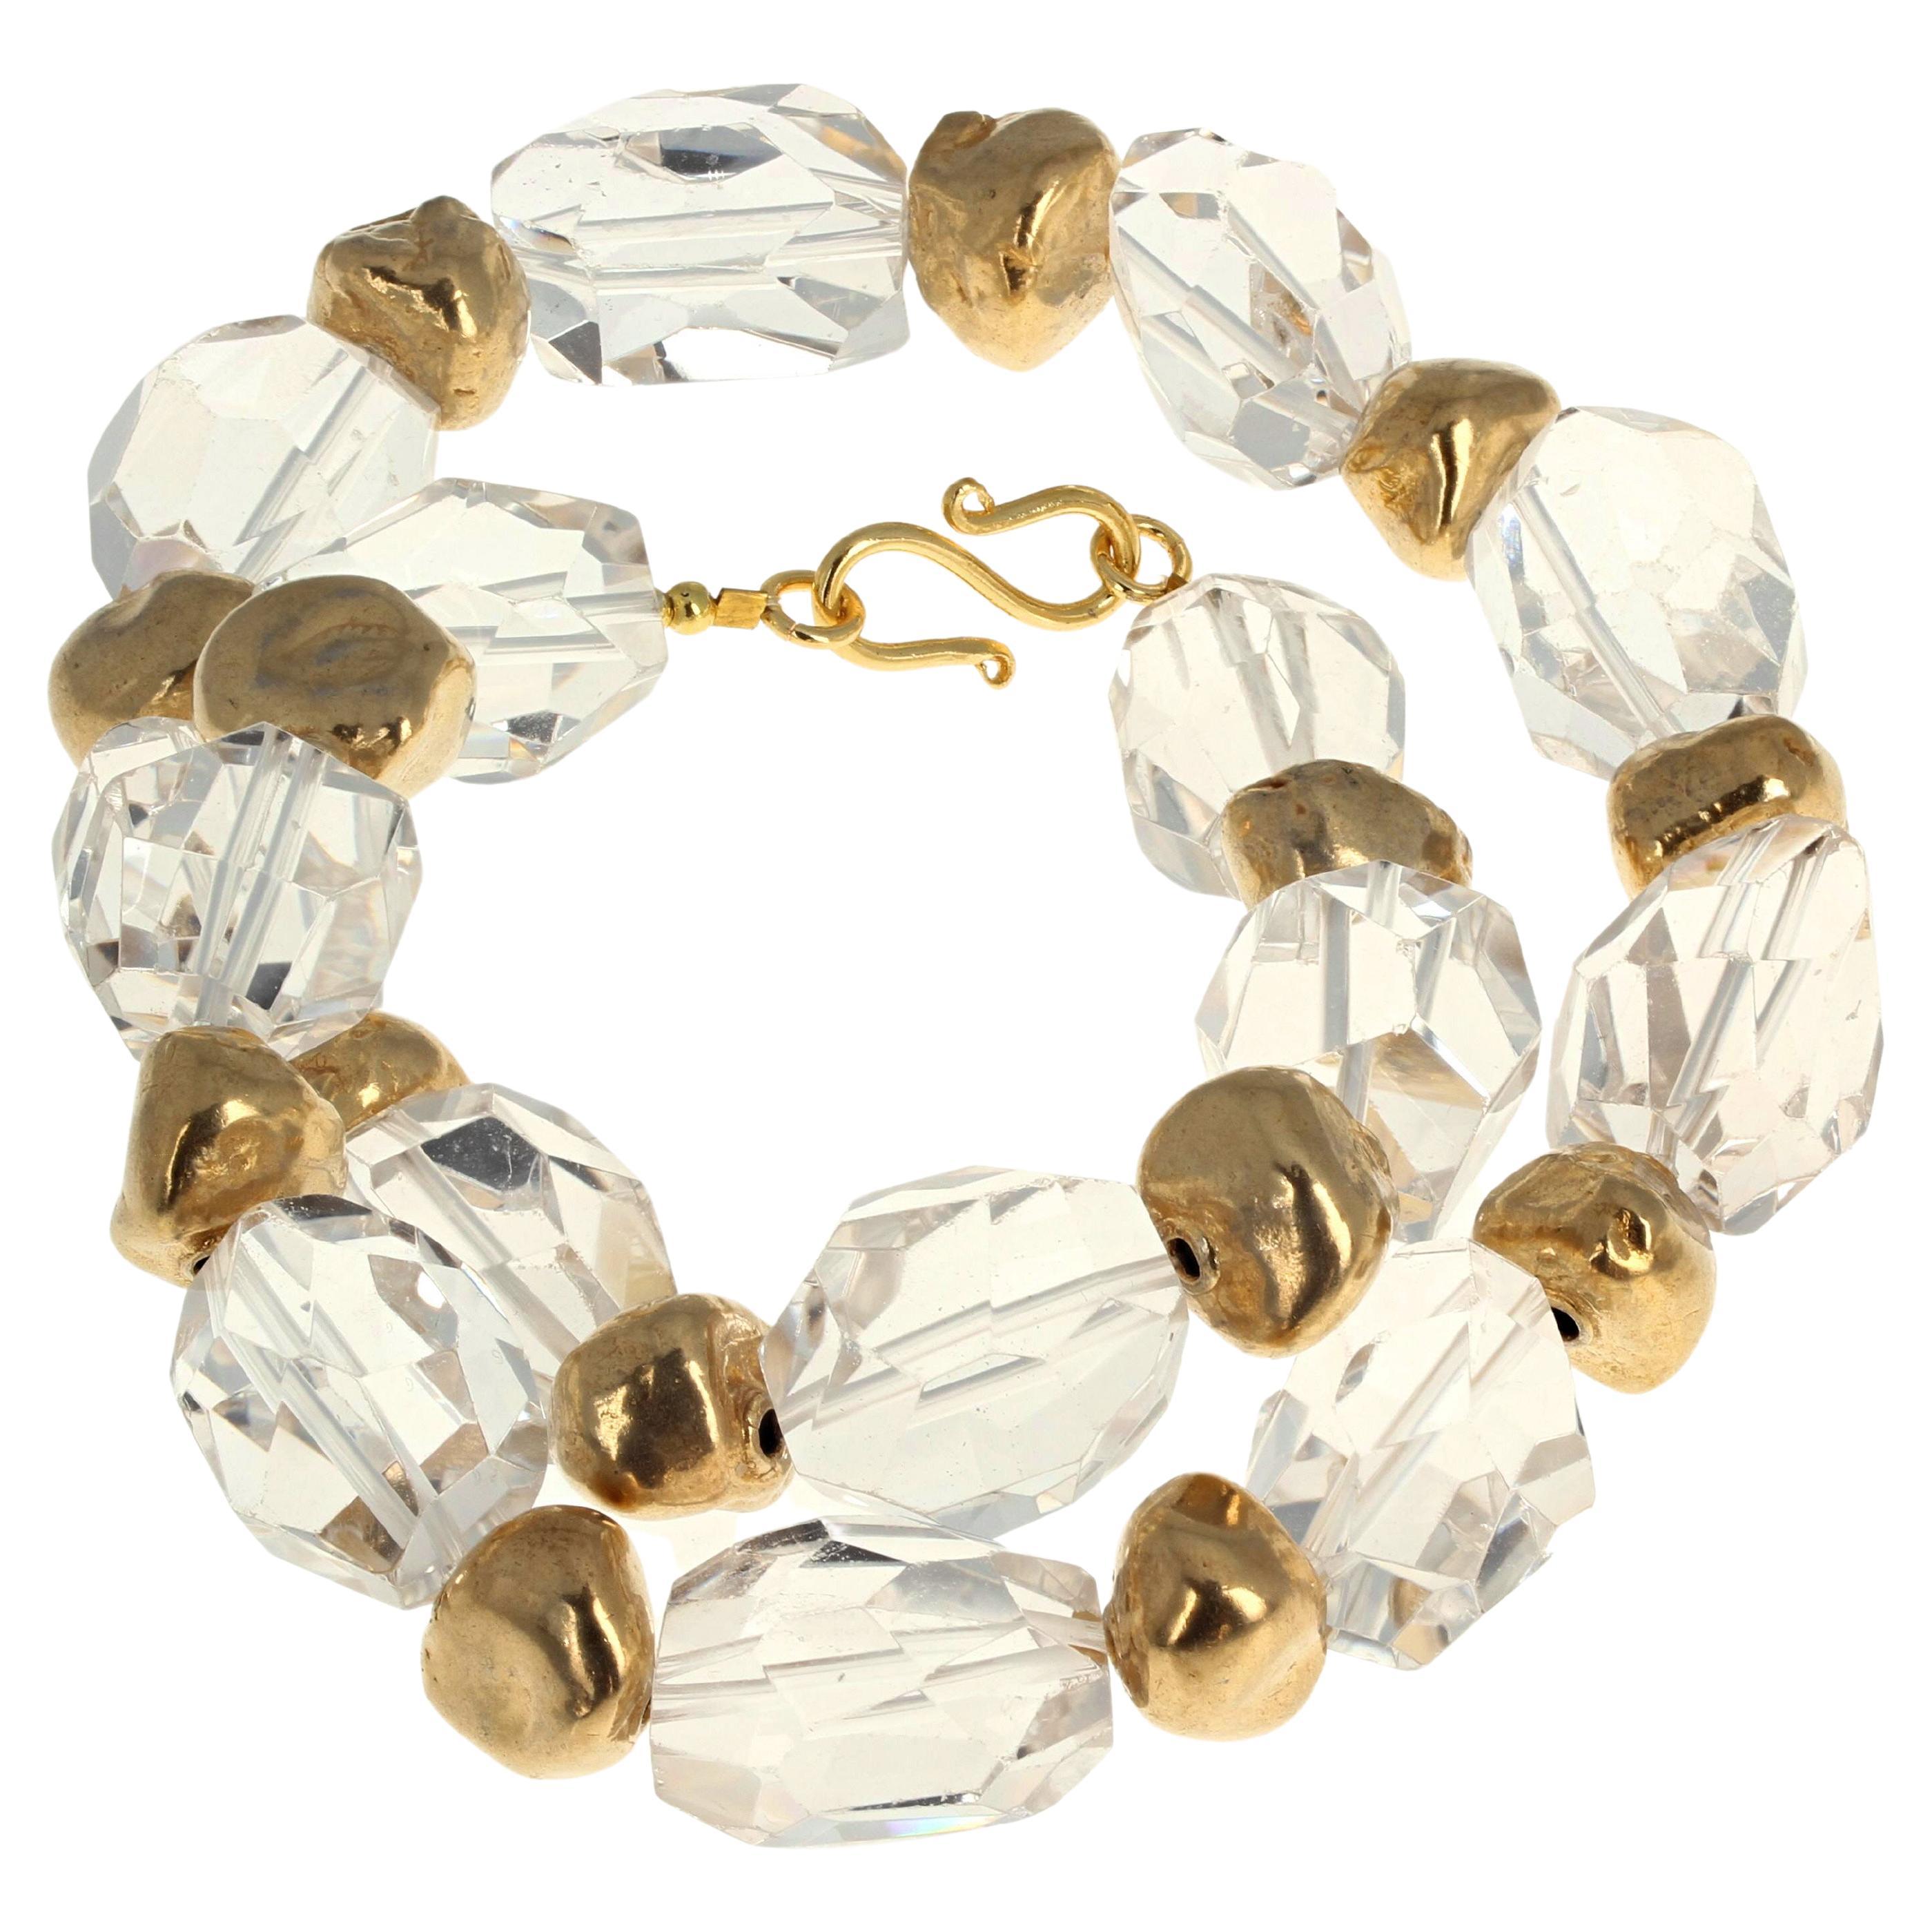 AJD Lovely Highly Polished Chunks of Natural Brilliant White Quartz 19" Necklace For Sale